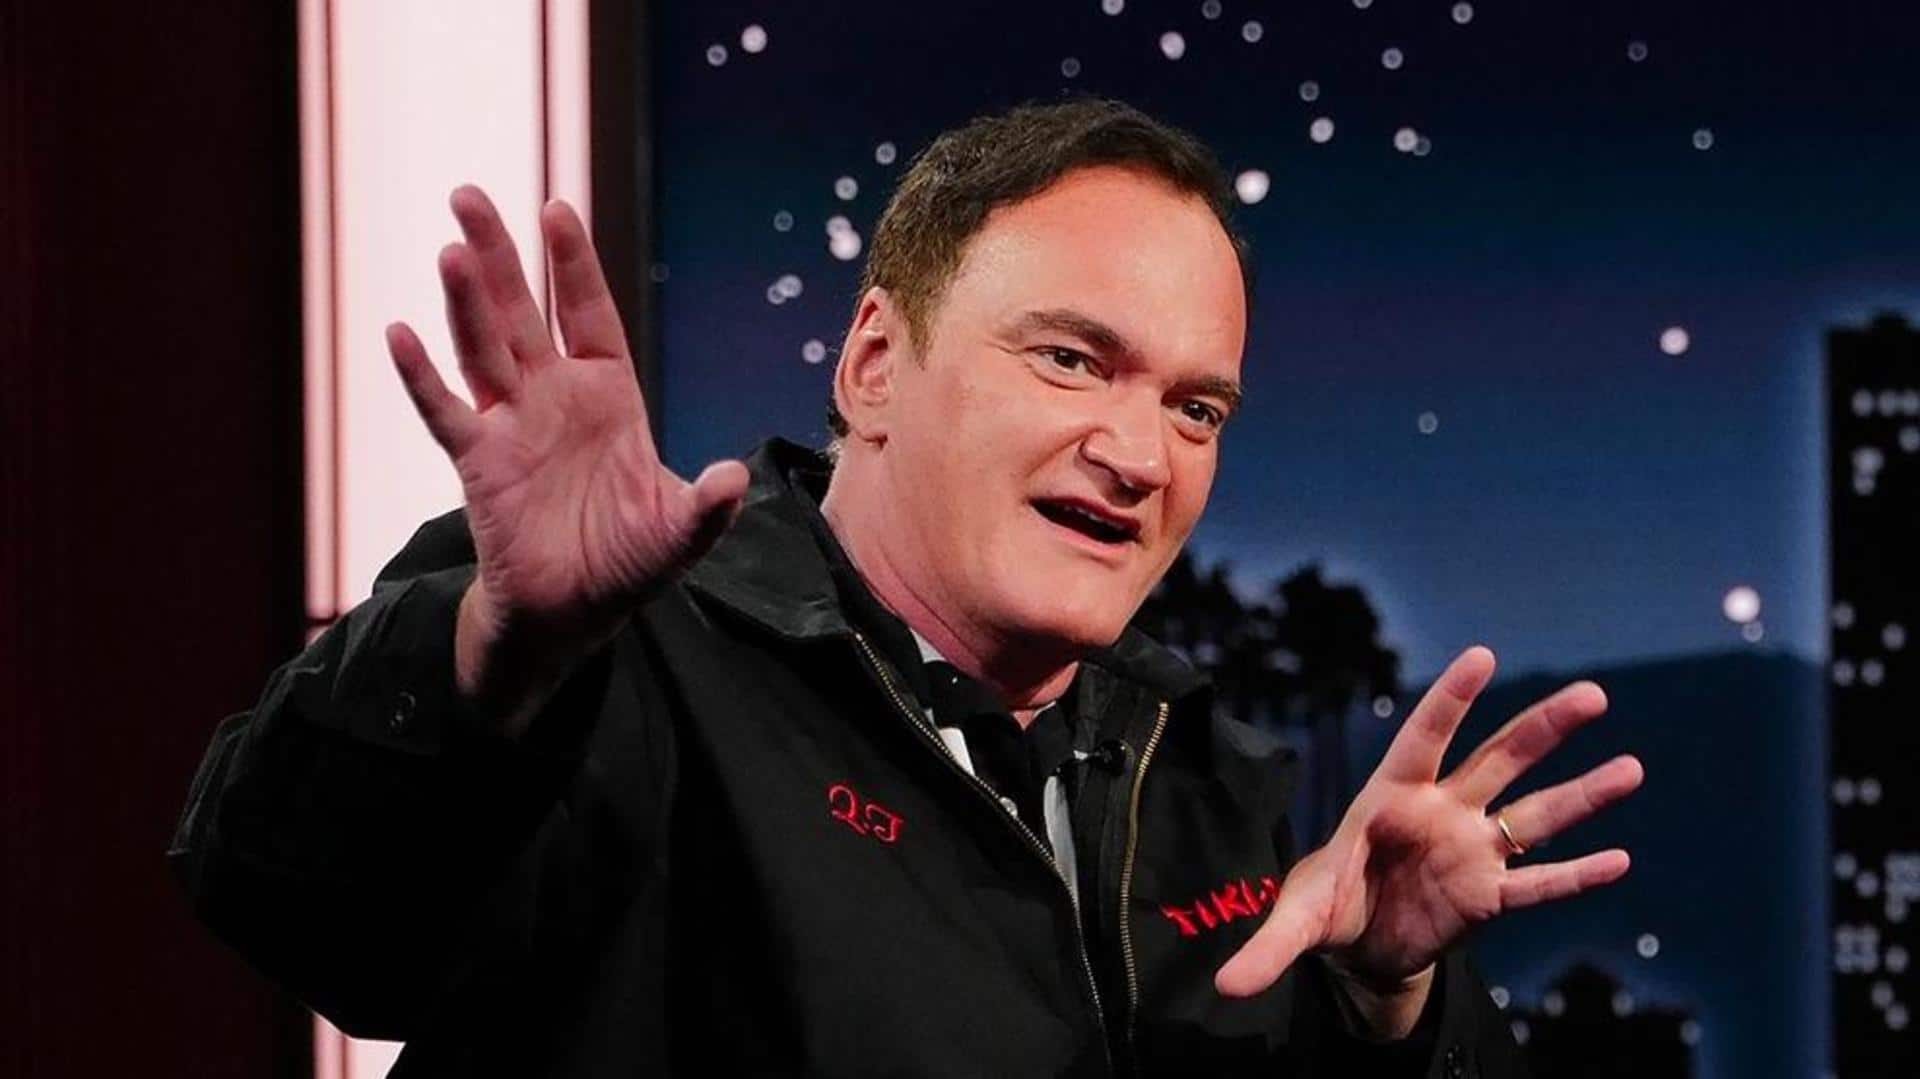 'The Movie Critic': All about Quentin Tarantino's last feature film